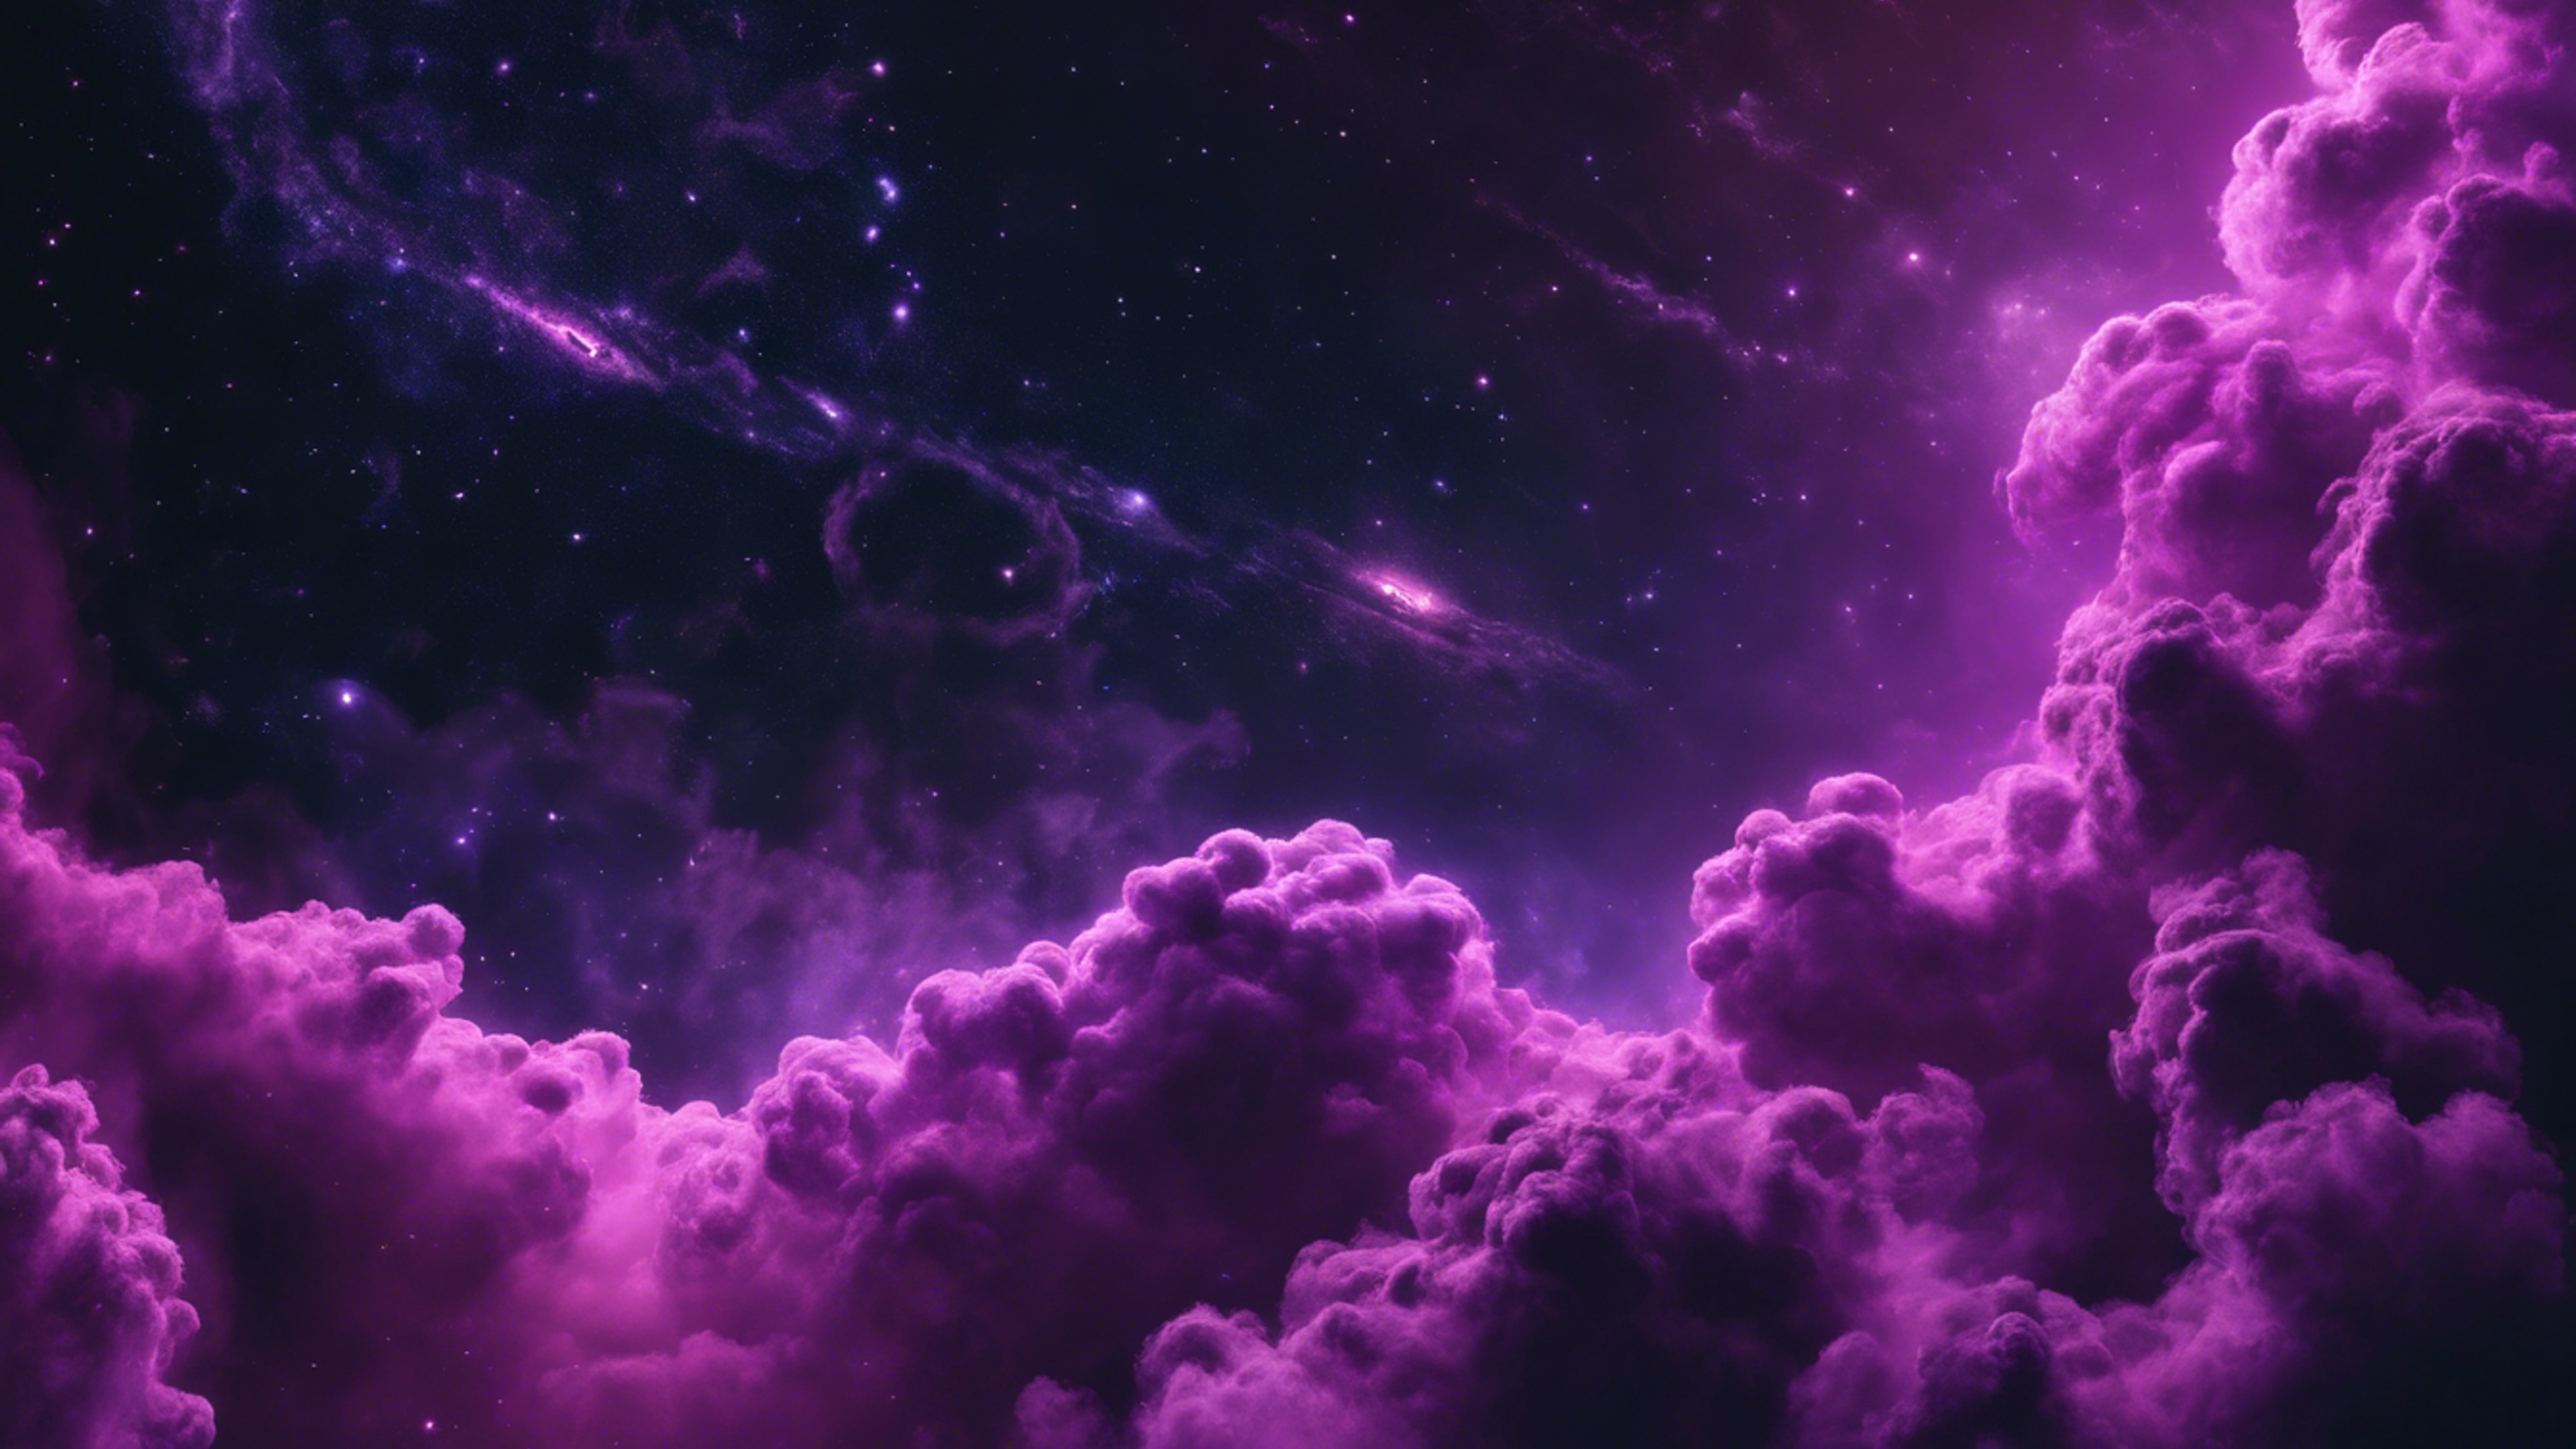 A galaxy scene with swirling neon purple clouds against star-spangled, cool black background. Wallpaper[557a8cf107504dbea099]